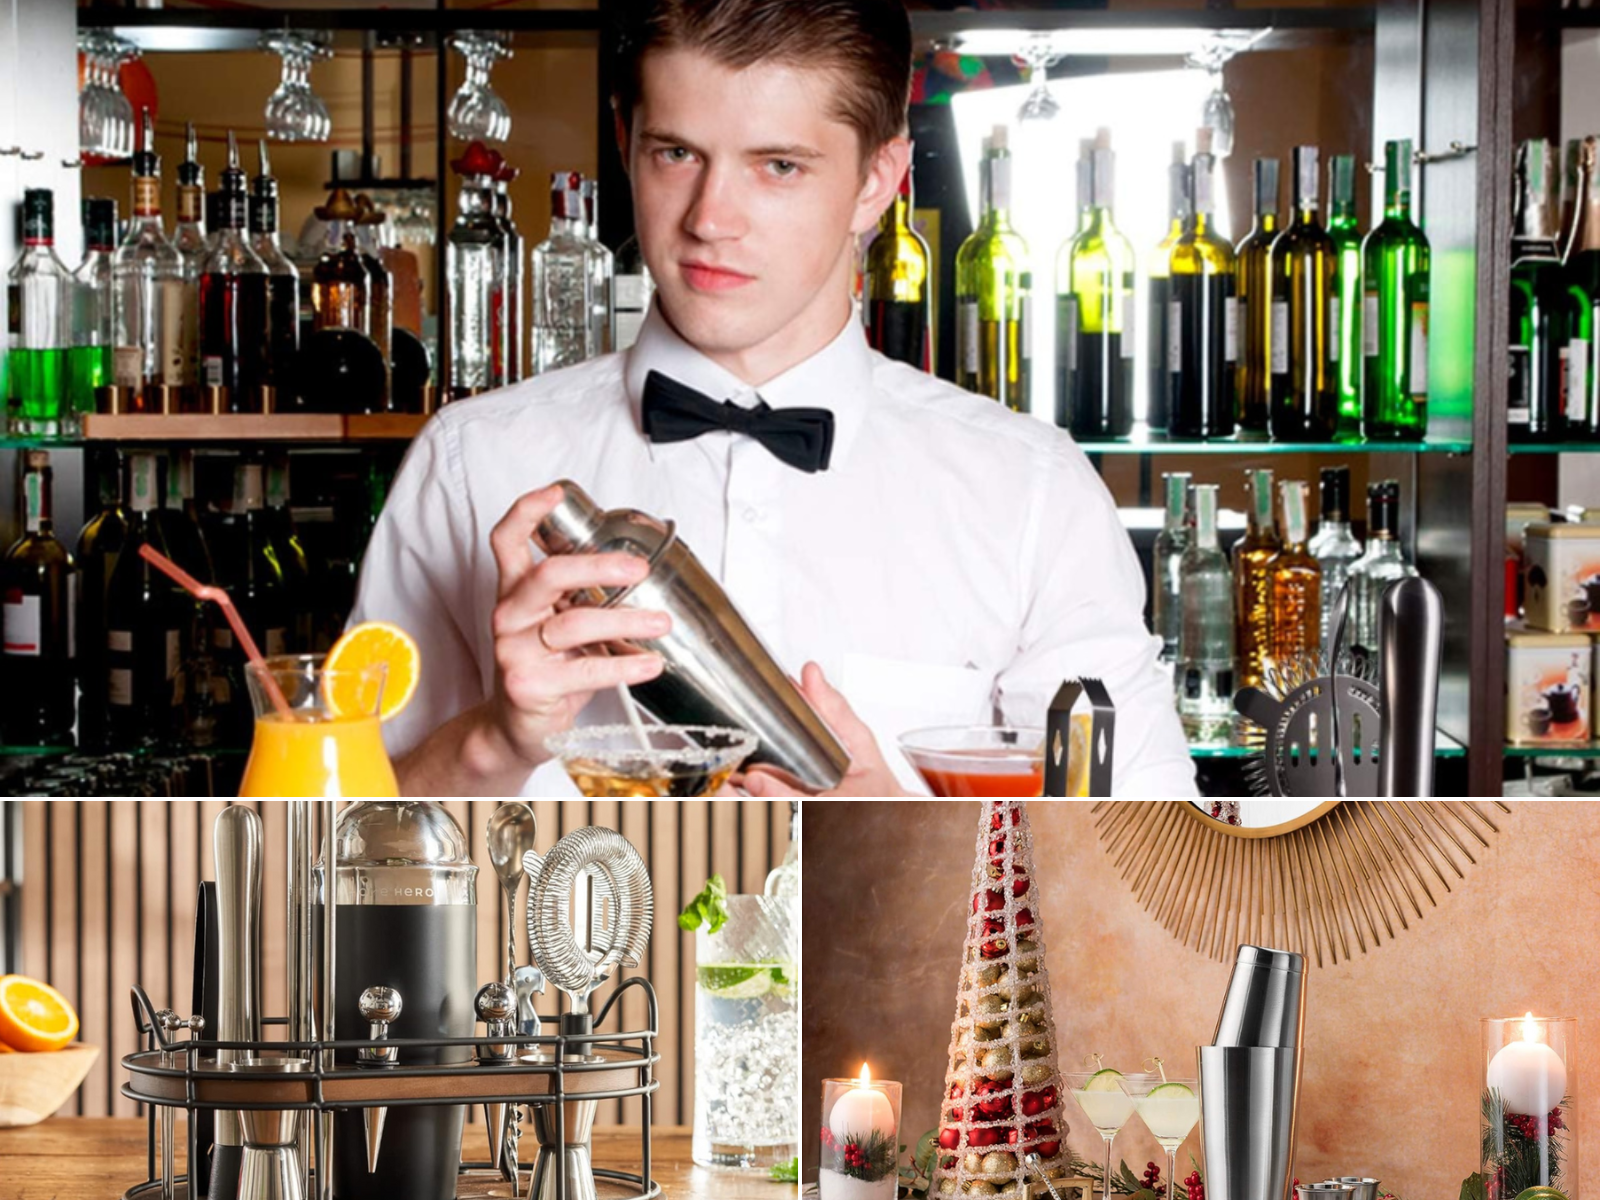 A bartender tool kit sitting on a table with a drink, another sitting on a table, and a Man behind a bar mixing a drink.